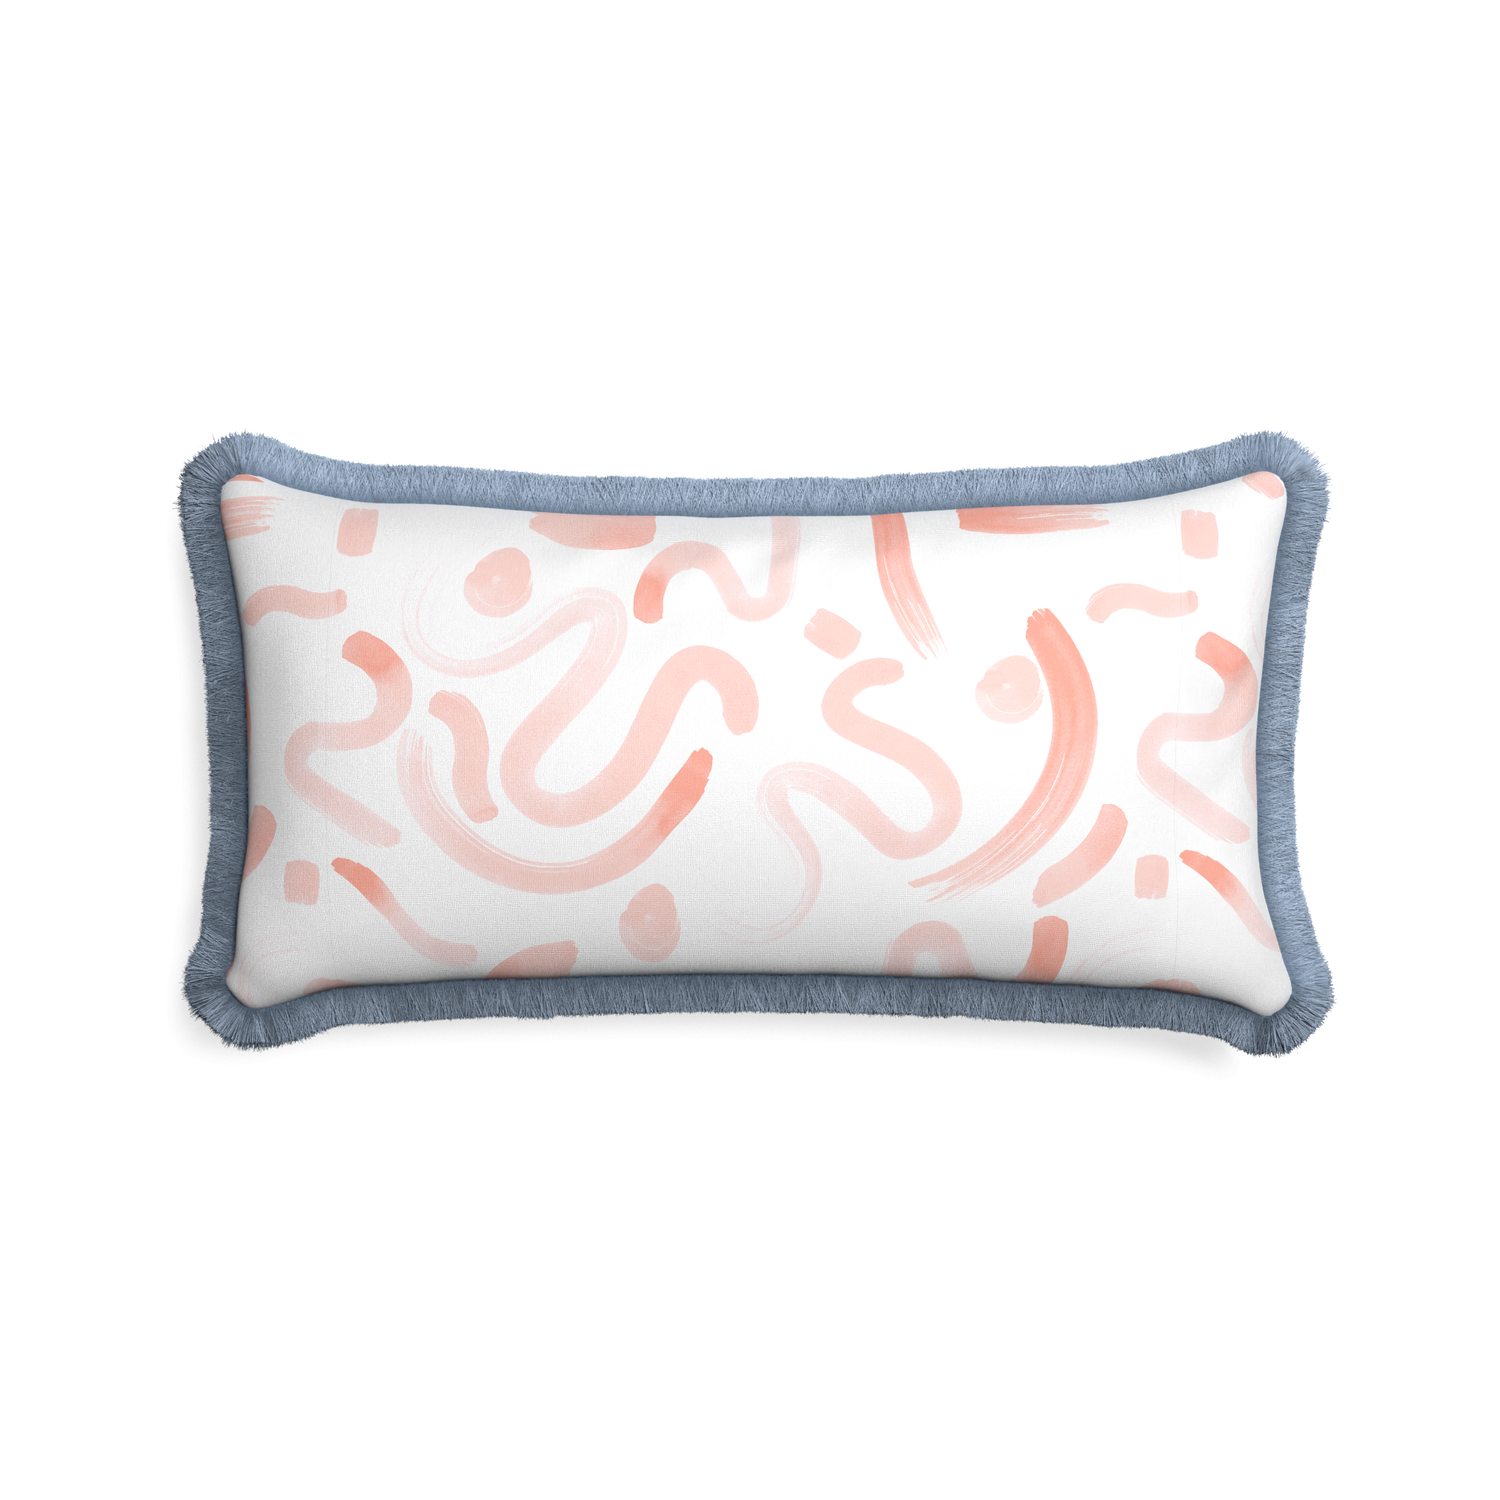 Midi-lumbar hockney pink custom pink graphicpillow with sky fringe on white background